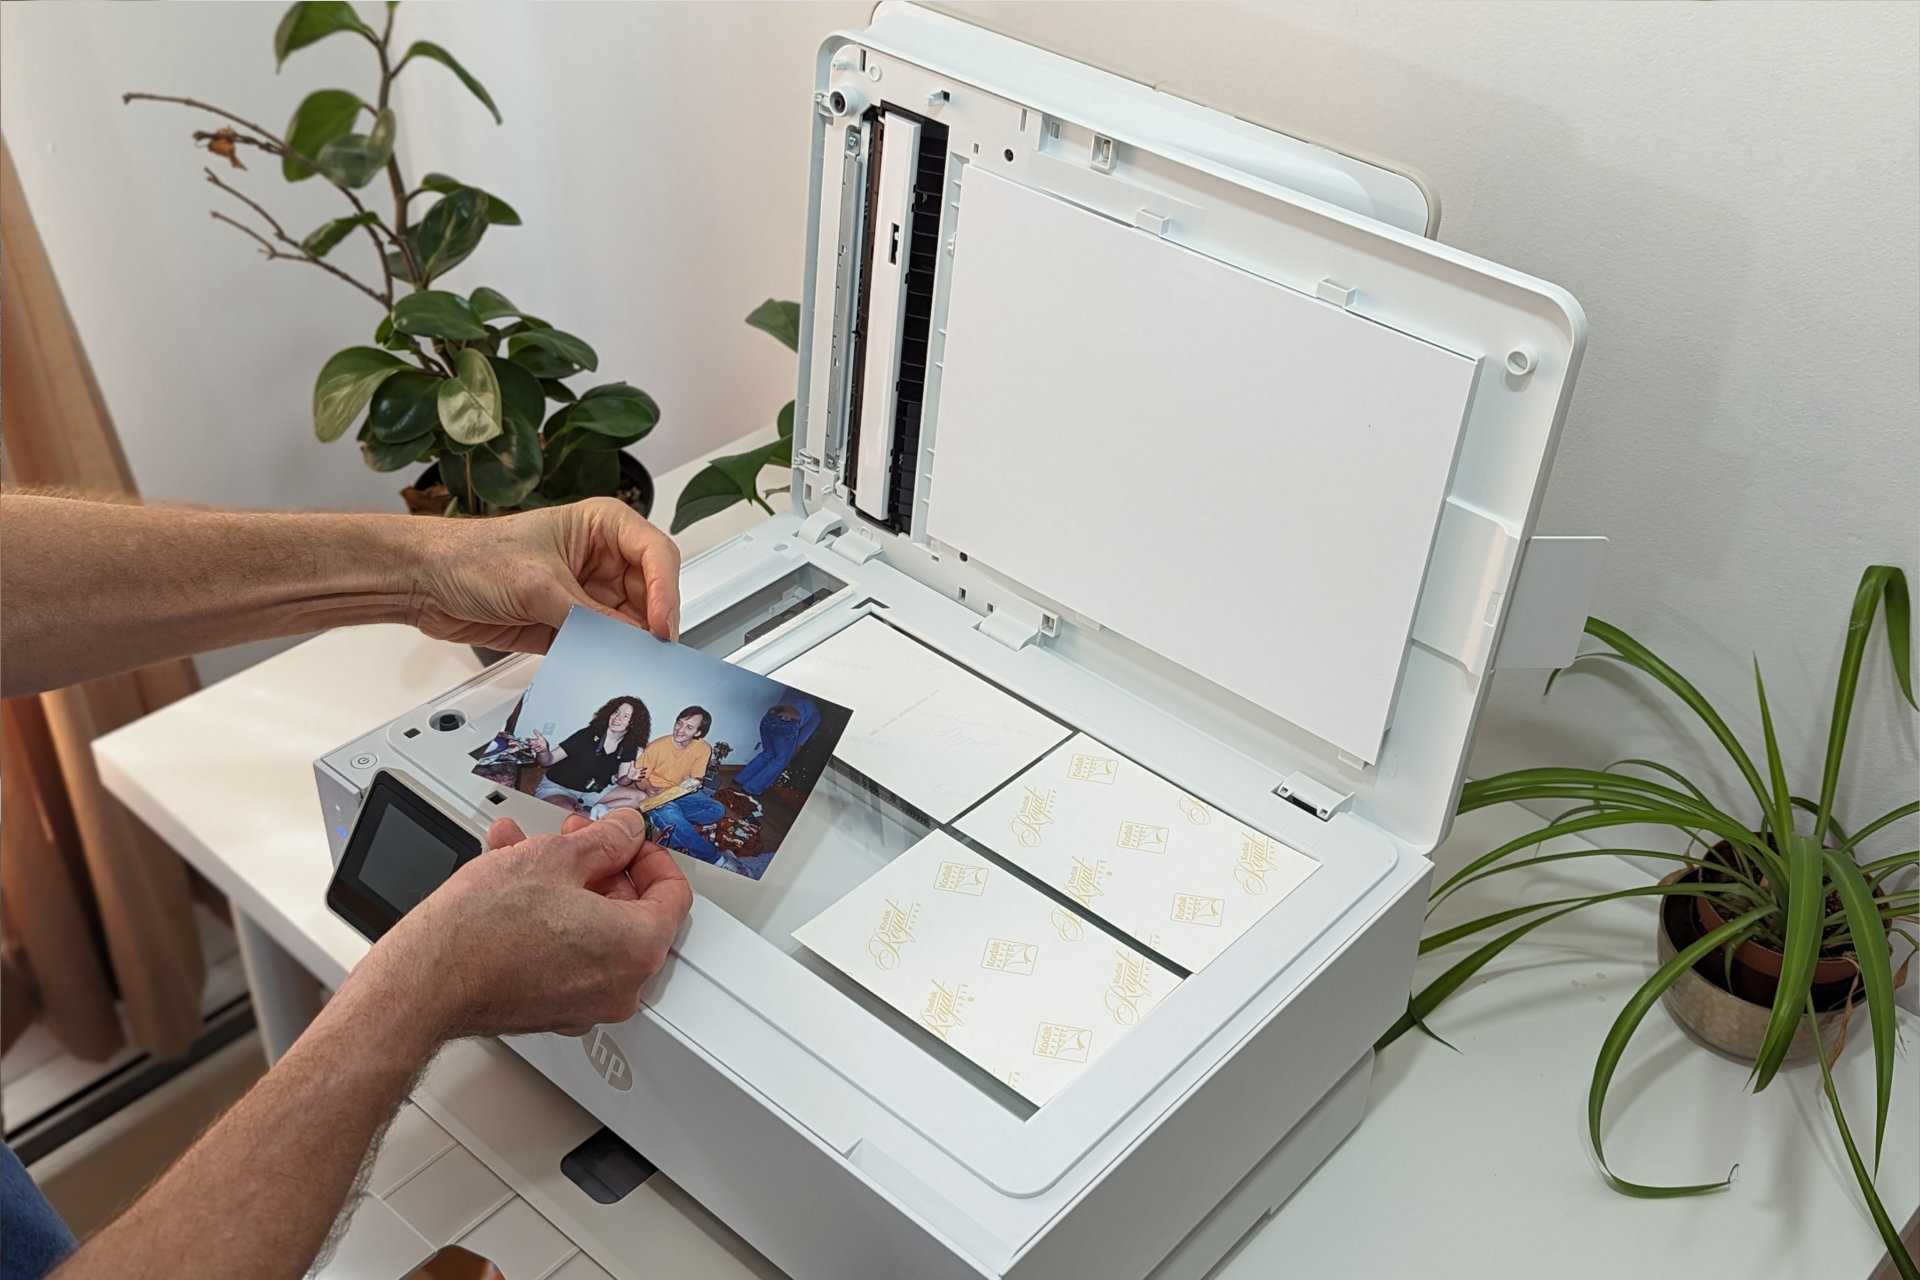 Placing photos on the HP Envy Inspire 7955e's flatbed scanner.